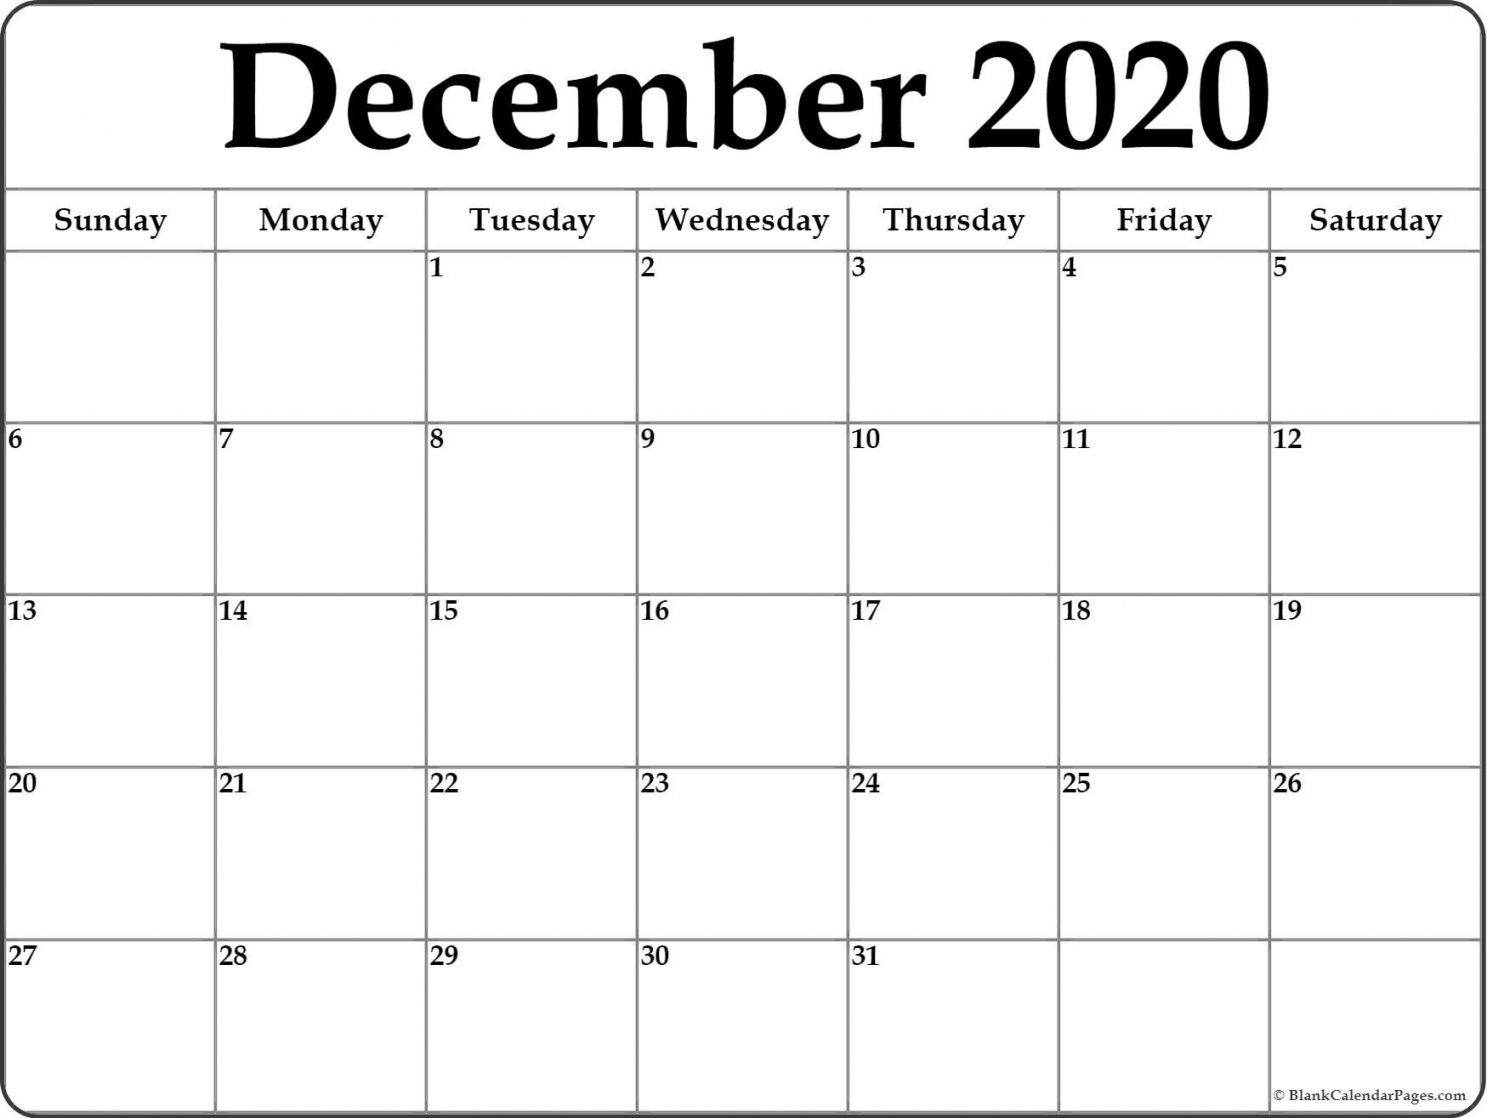 Dec 2020 Blank Calendars To Print Without Downloading